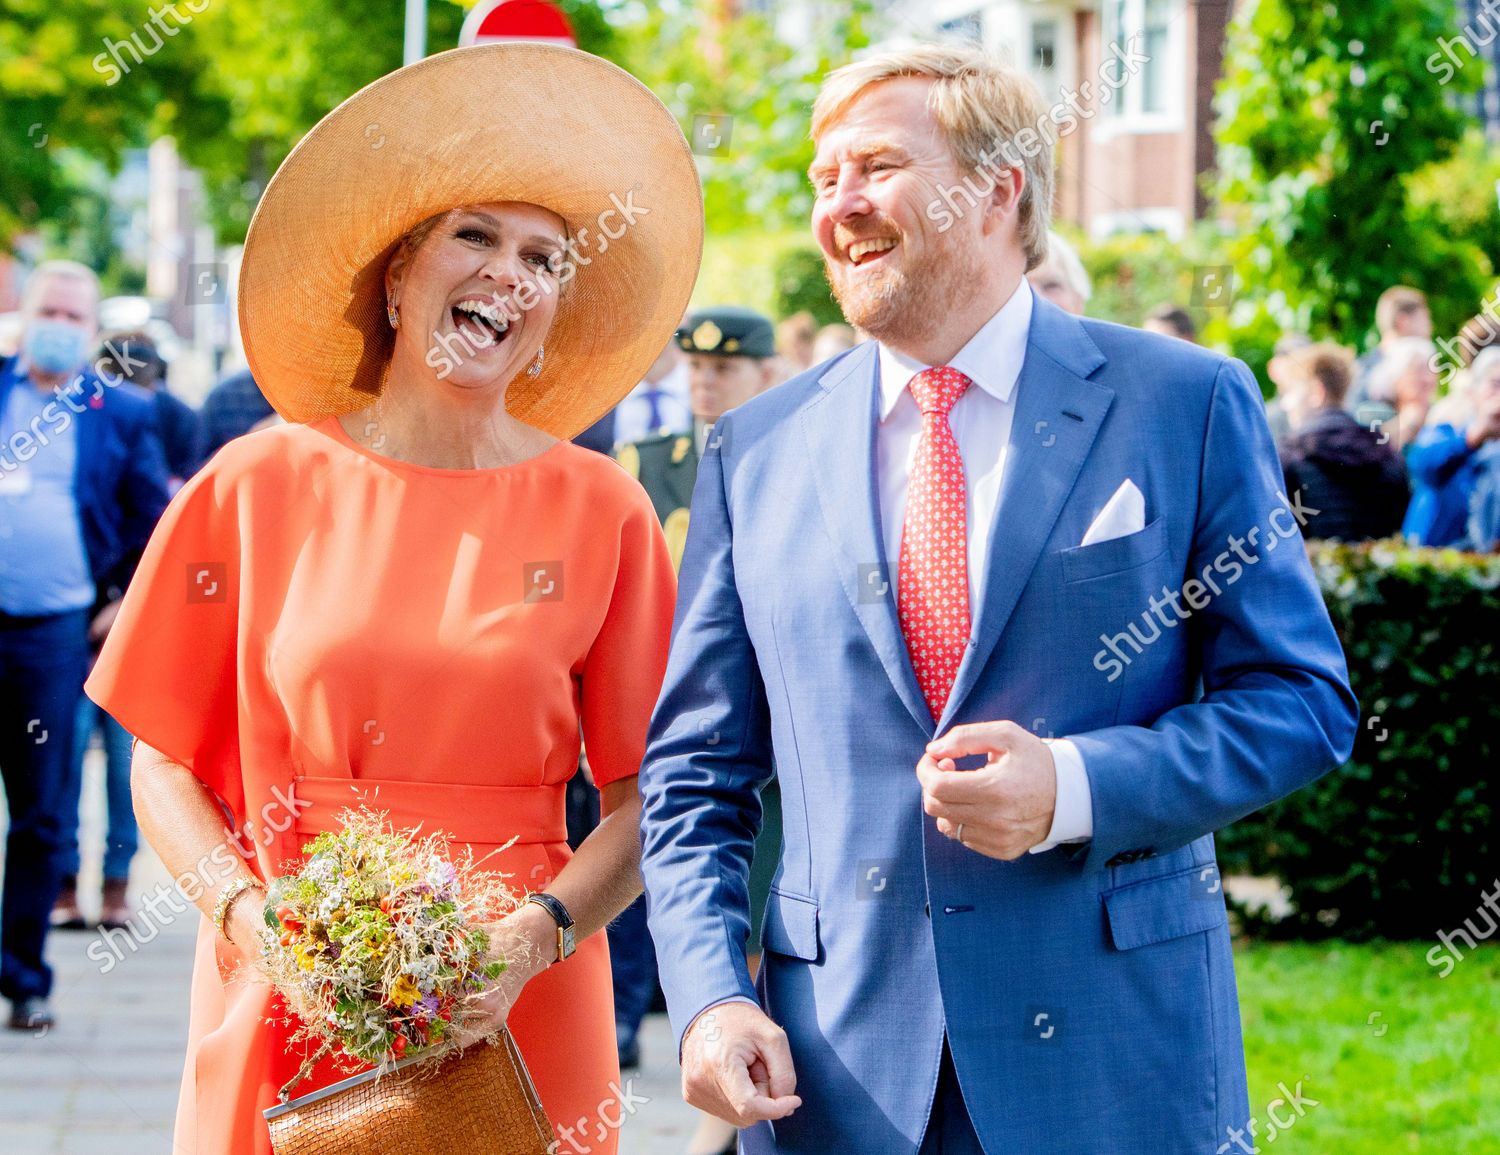 king-willem-alexander-and-queen-maxima-visit-to-south-east-friesland-the-netherlands-shutterstock-editorial-10779996au.jpg